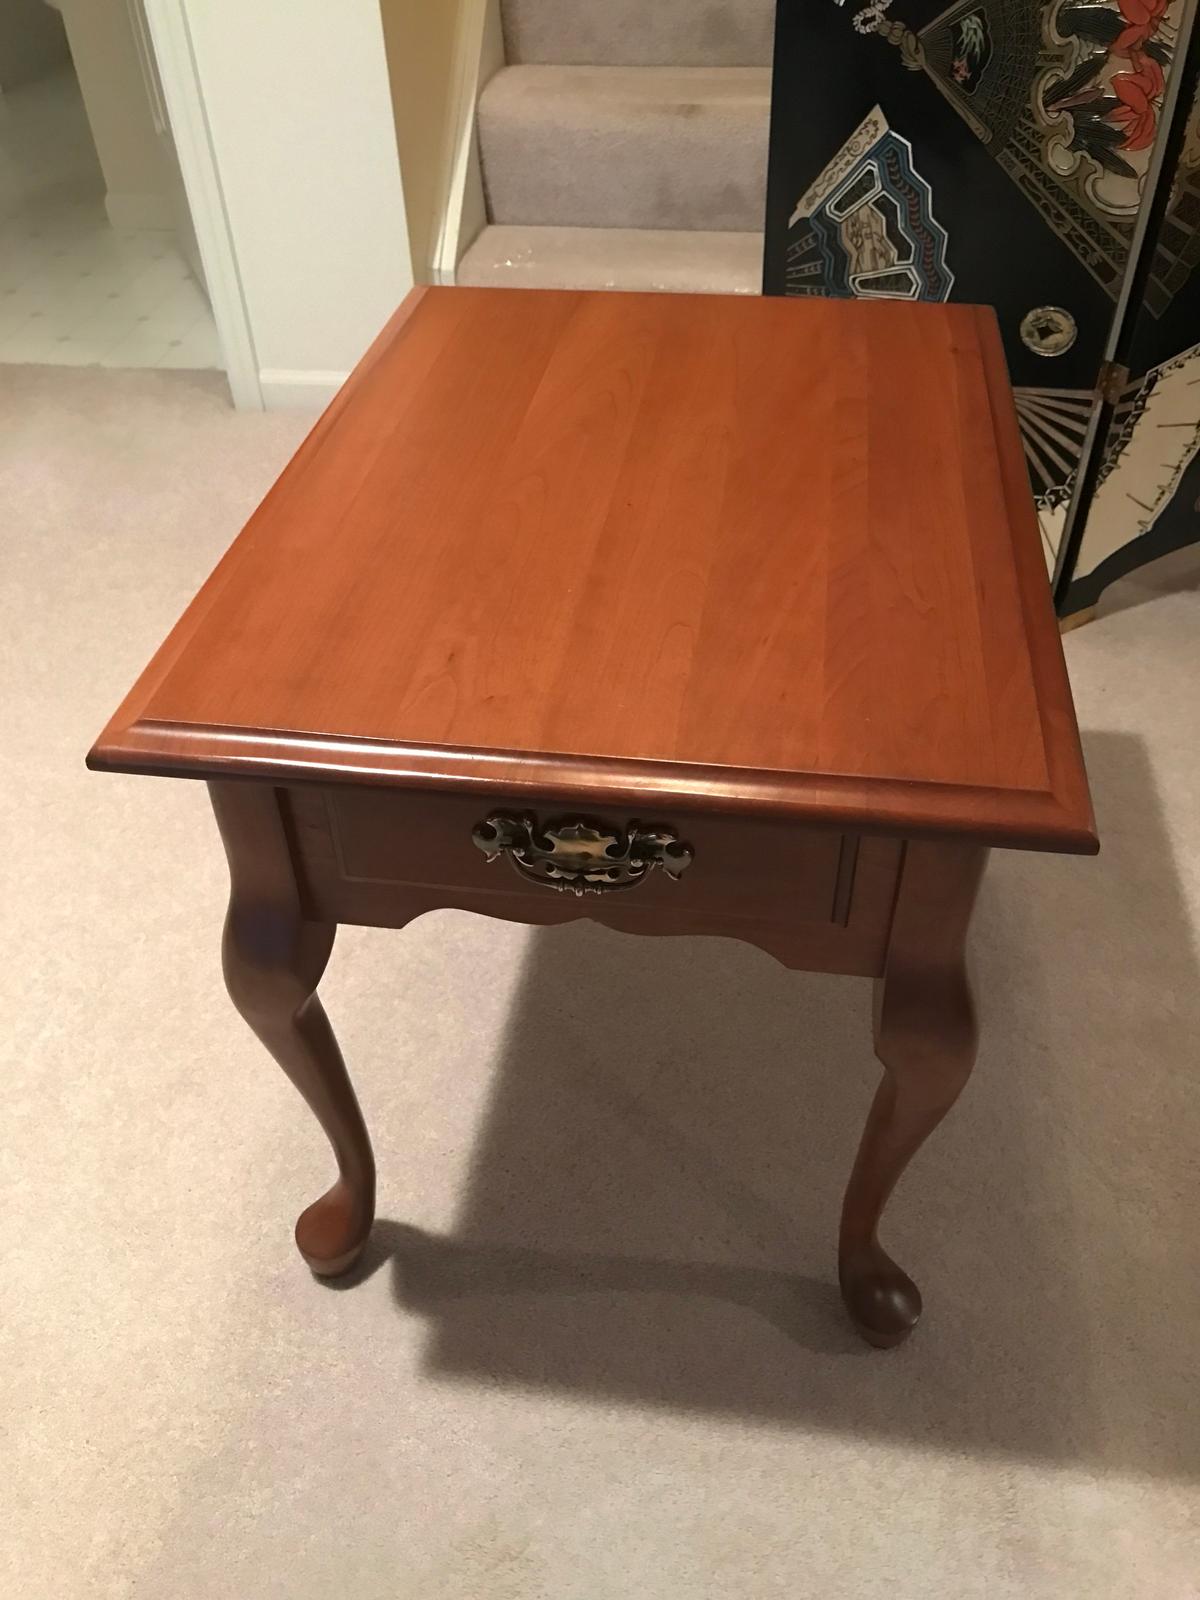 Amish Furniture Cherry 1-Drawer End Table Is 20" x 26" x 21" Tall